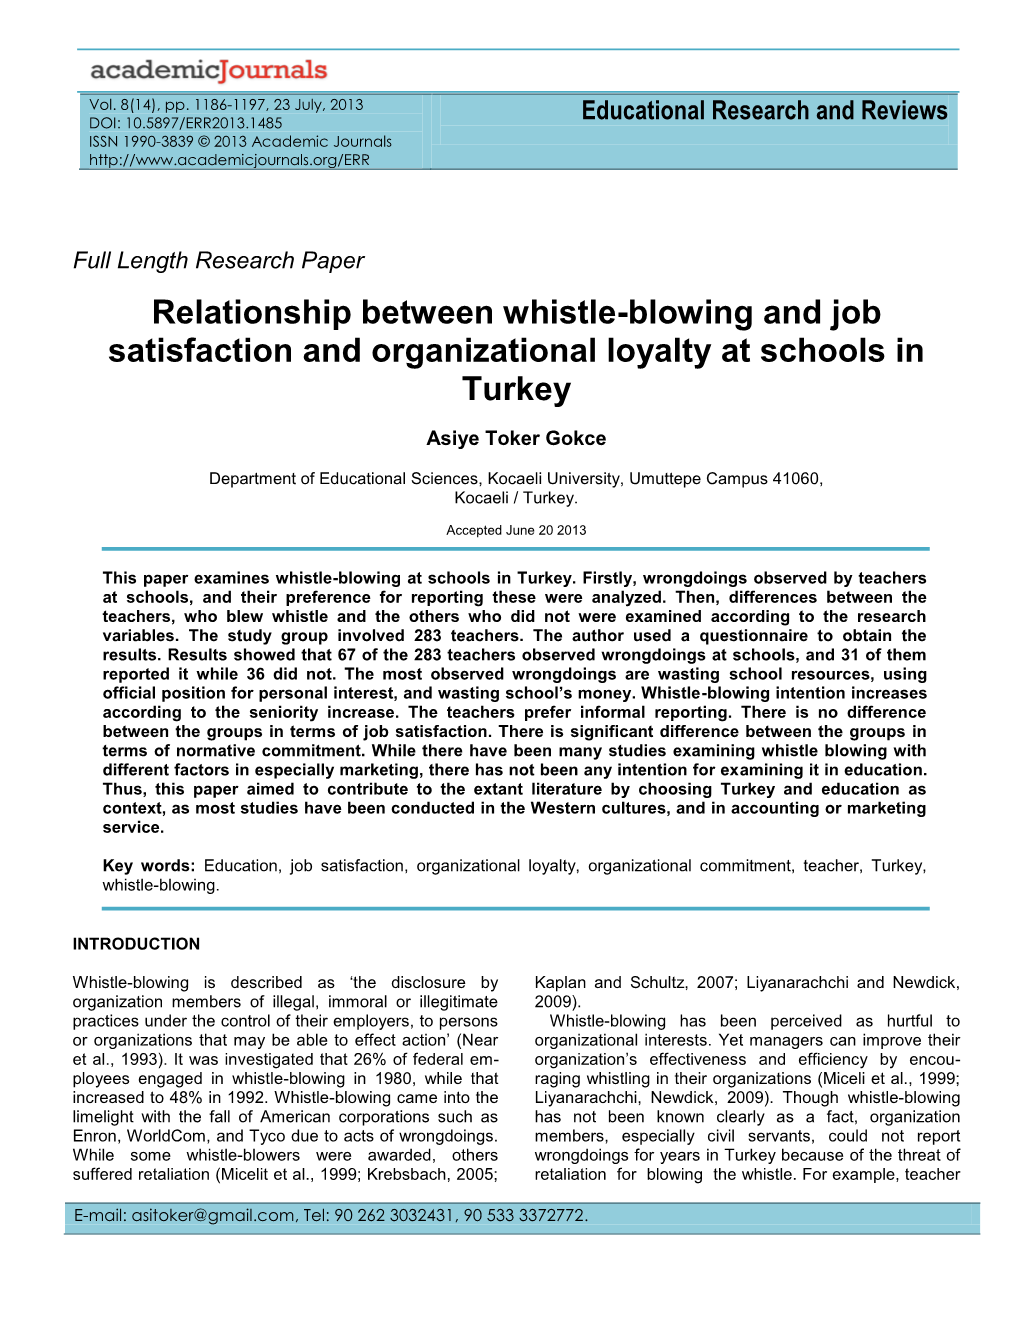 Relationship Between Whistle-Blowing and Job Satisfaction and Organizational Loyalty at Schools in Turkey